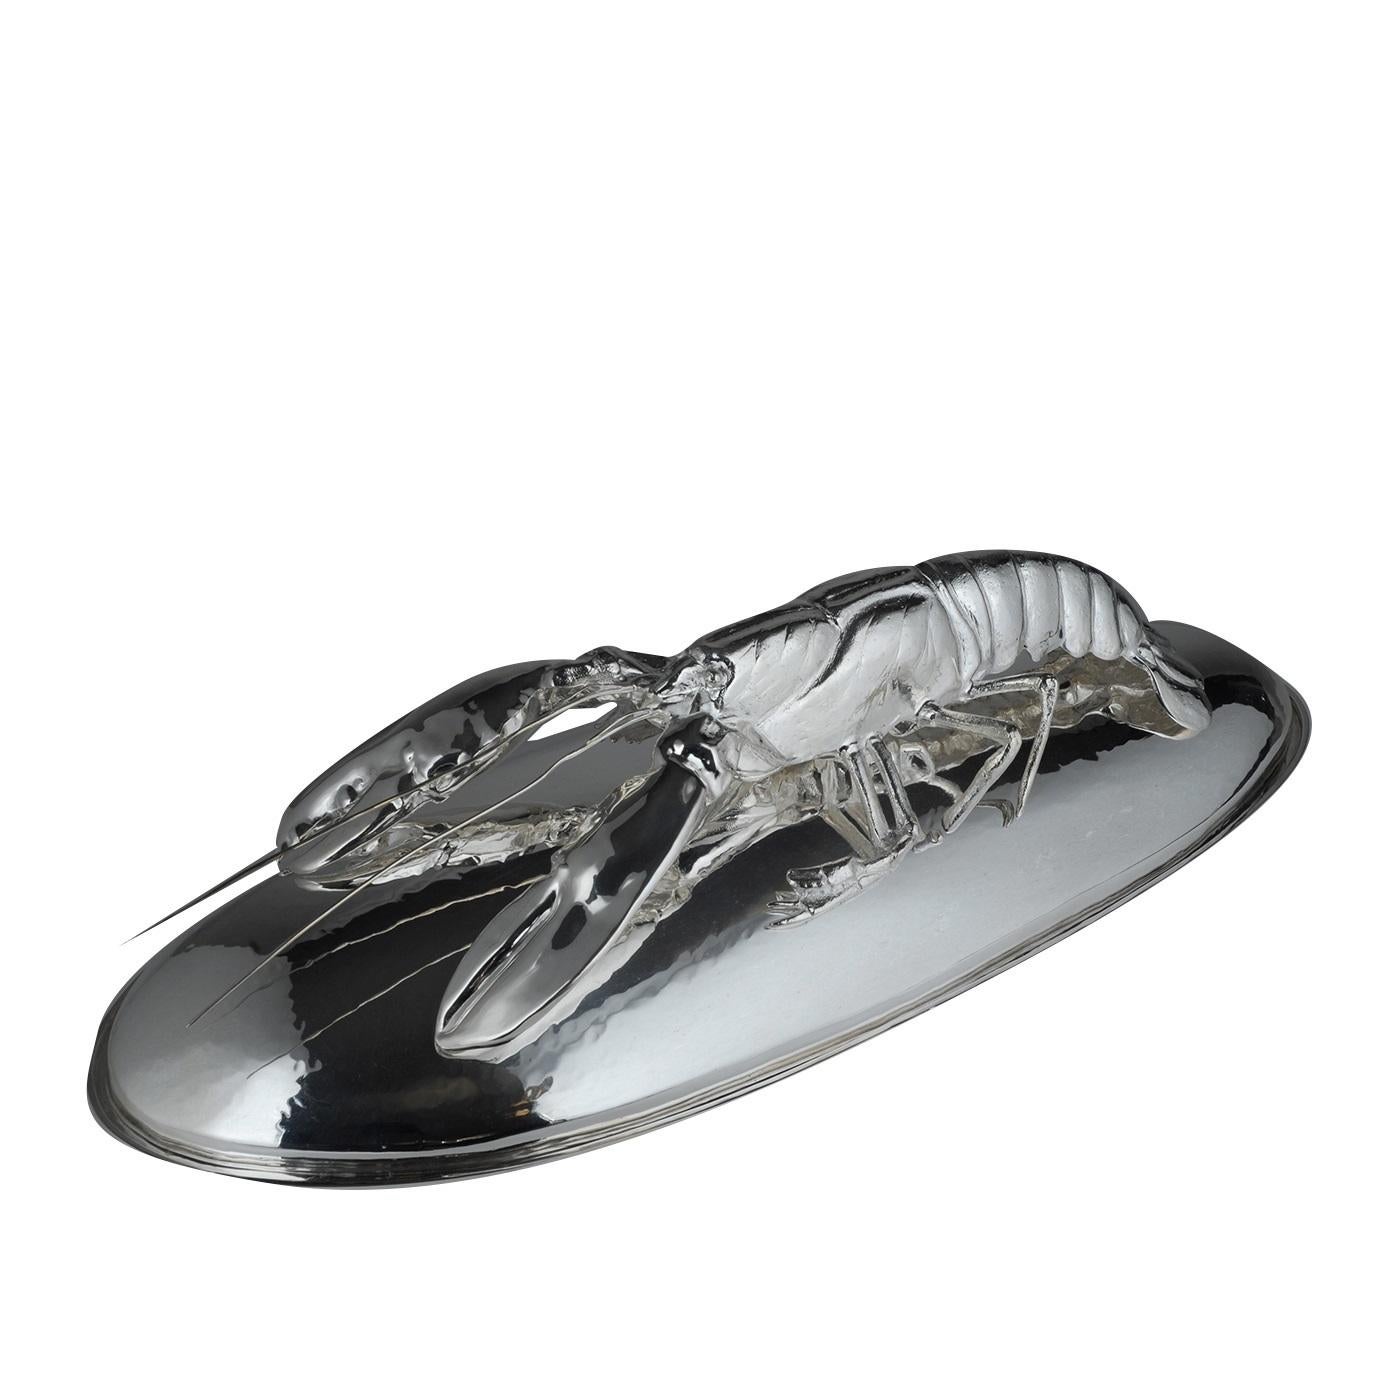 The magnificent decoration gracing the lid of this oval tray will make a statement in any decor and will give a dining room a luxurious feel and sophisticated touch. The entire piece is crafted in silver plated metal and the lobster is executed in